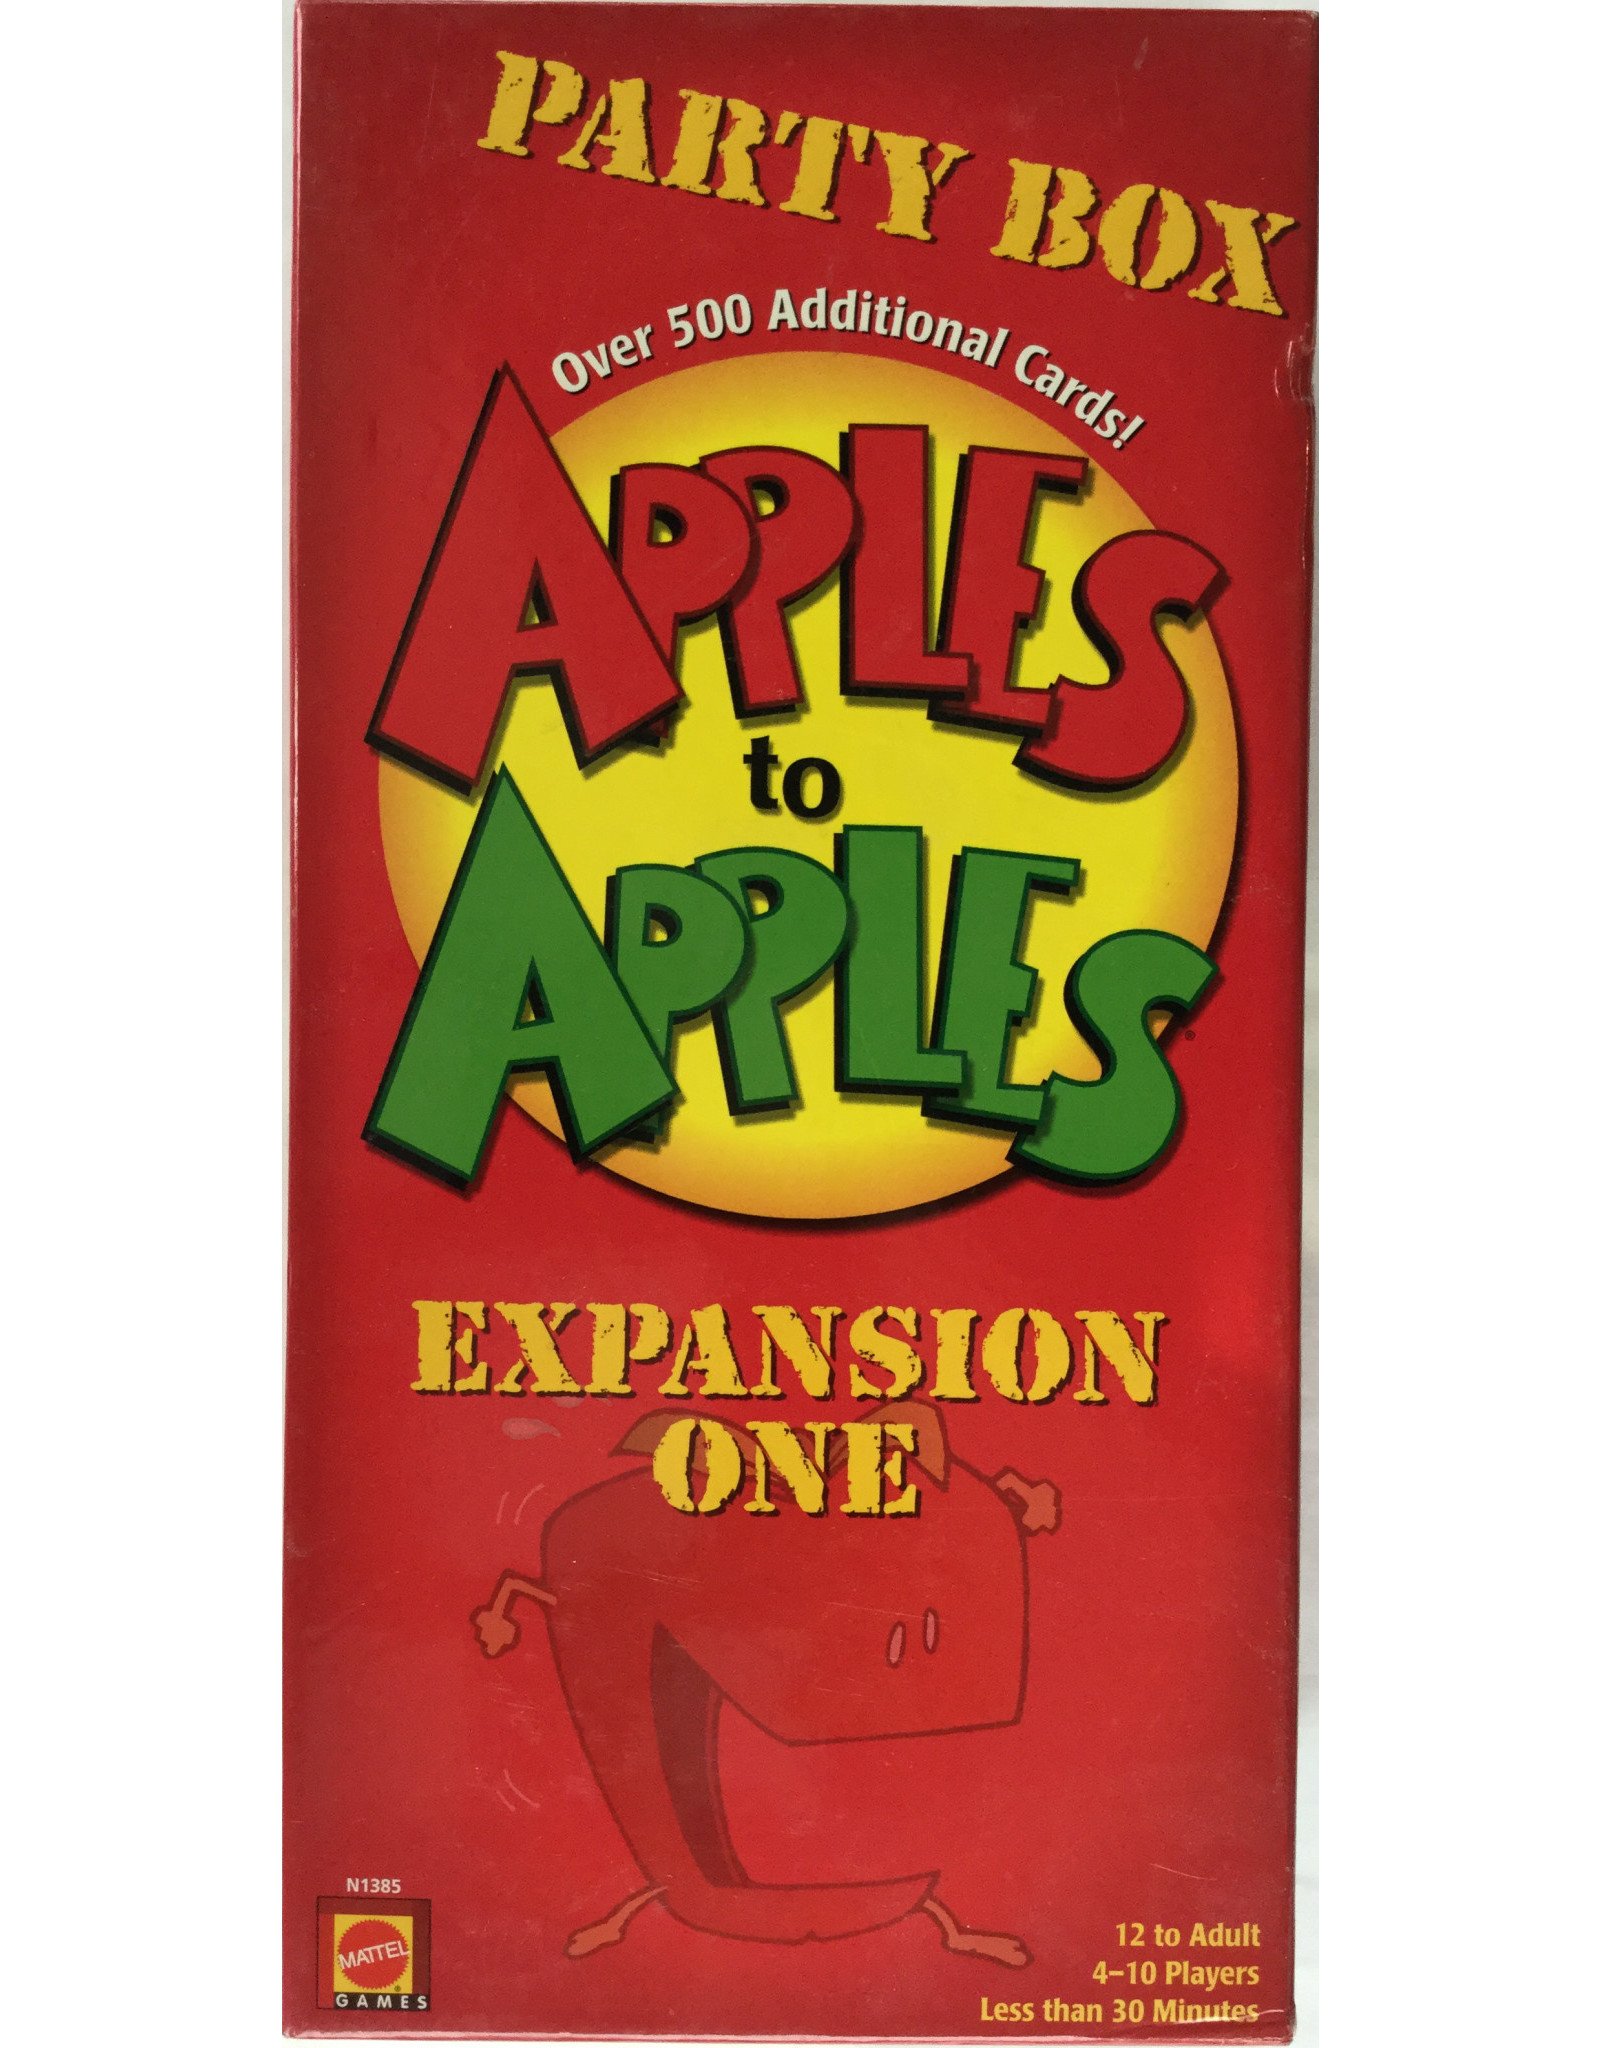 Mattel Apples to Apples Expansion One